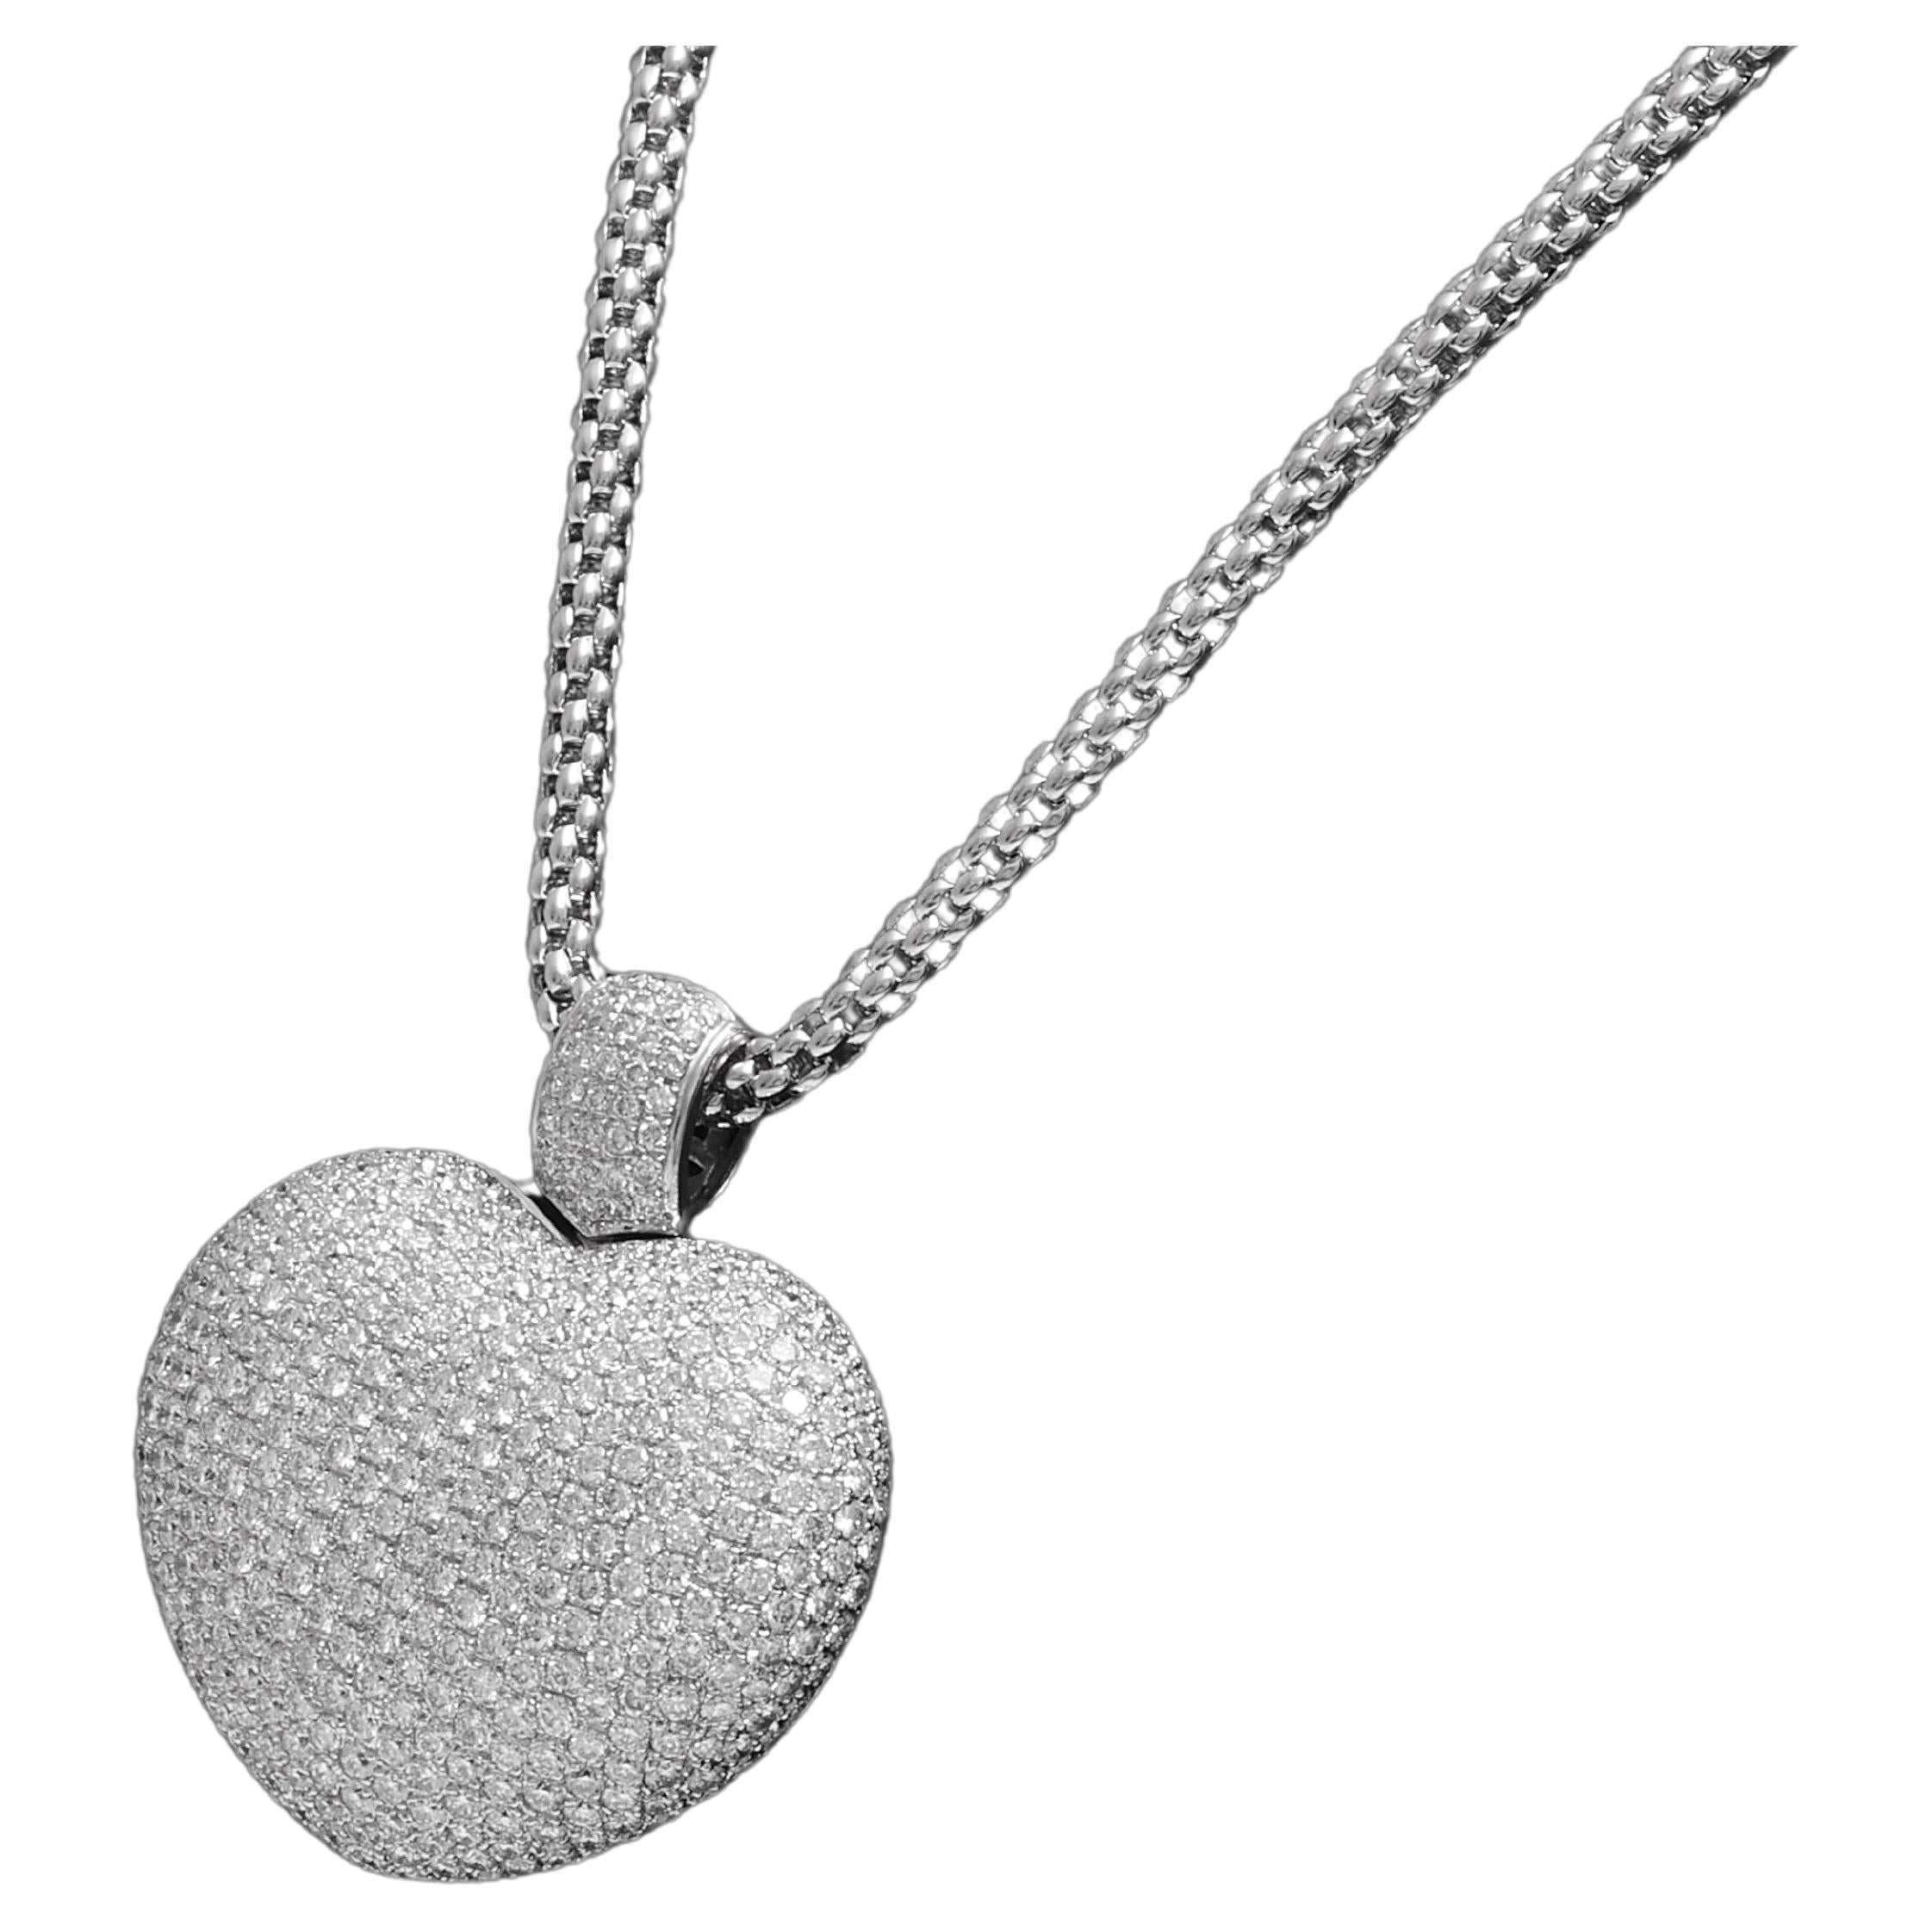 18kt White Gold Heart Pendant With 17 ct. Diamonds With 18kt White Gold Necklace For Sale